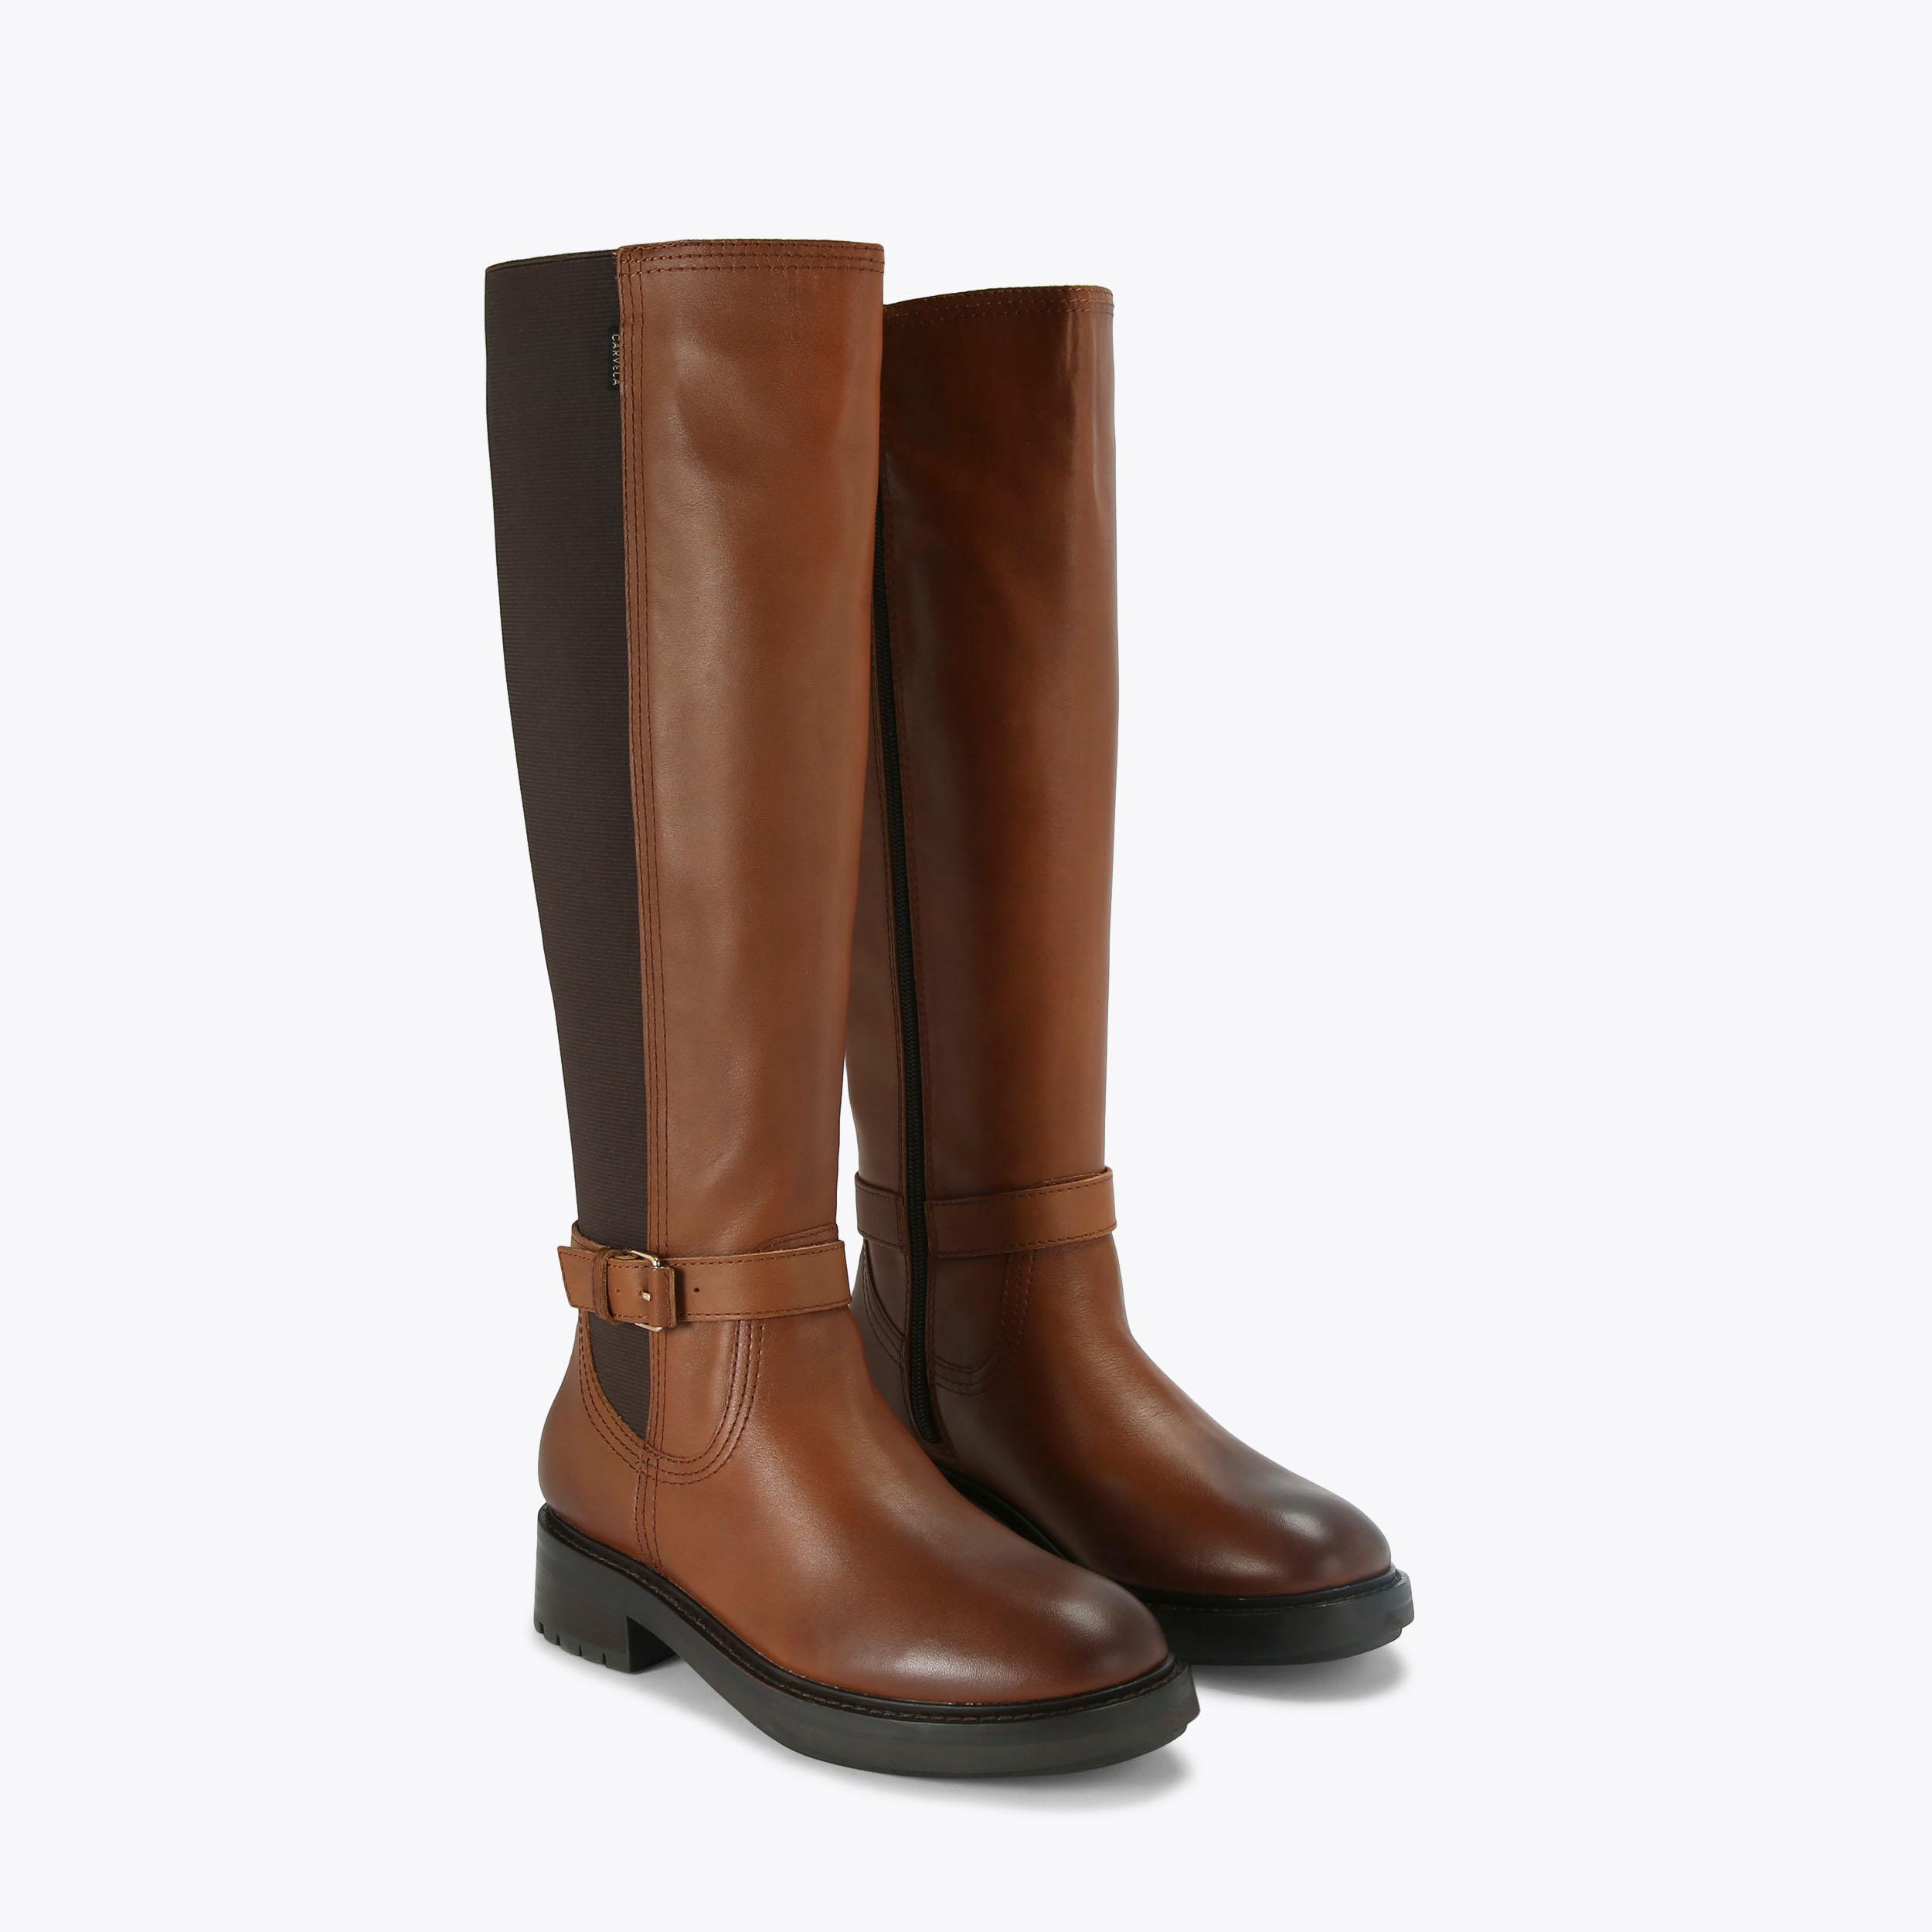 MARGOT HIGH Tan Leather Boots by CARVELA COMFORT